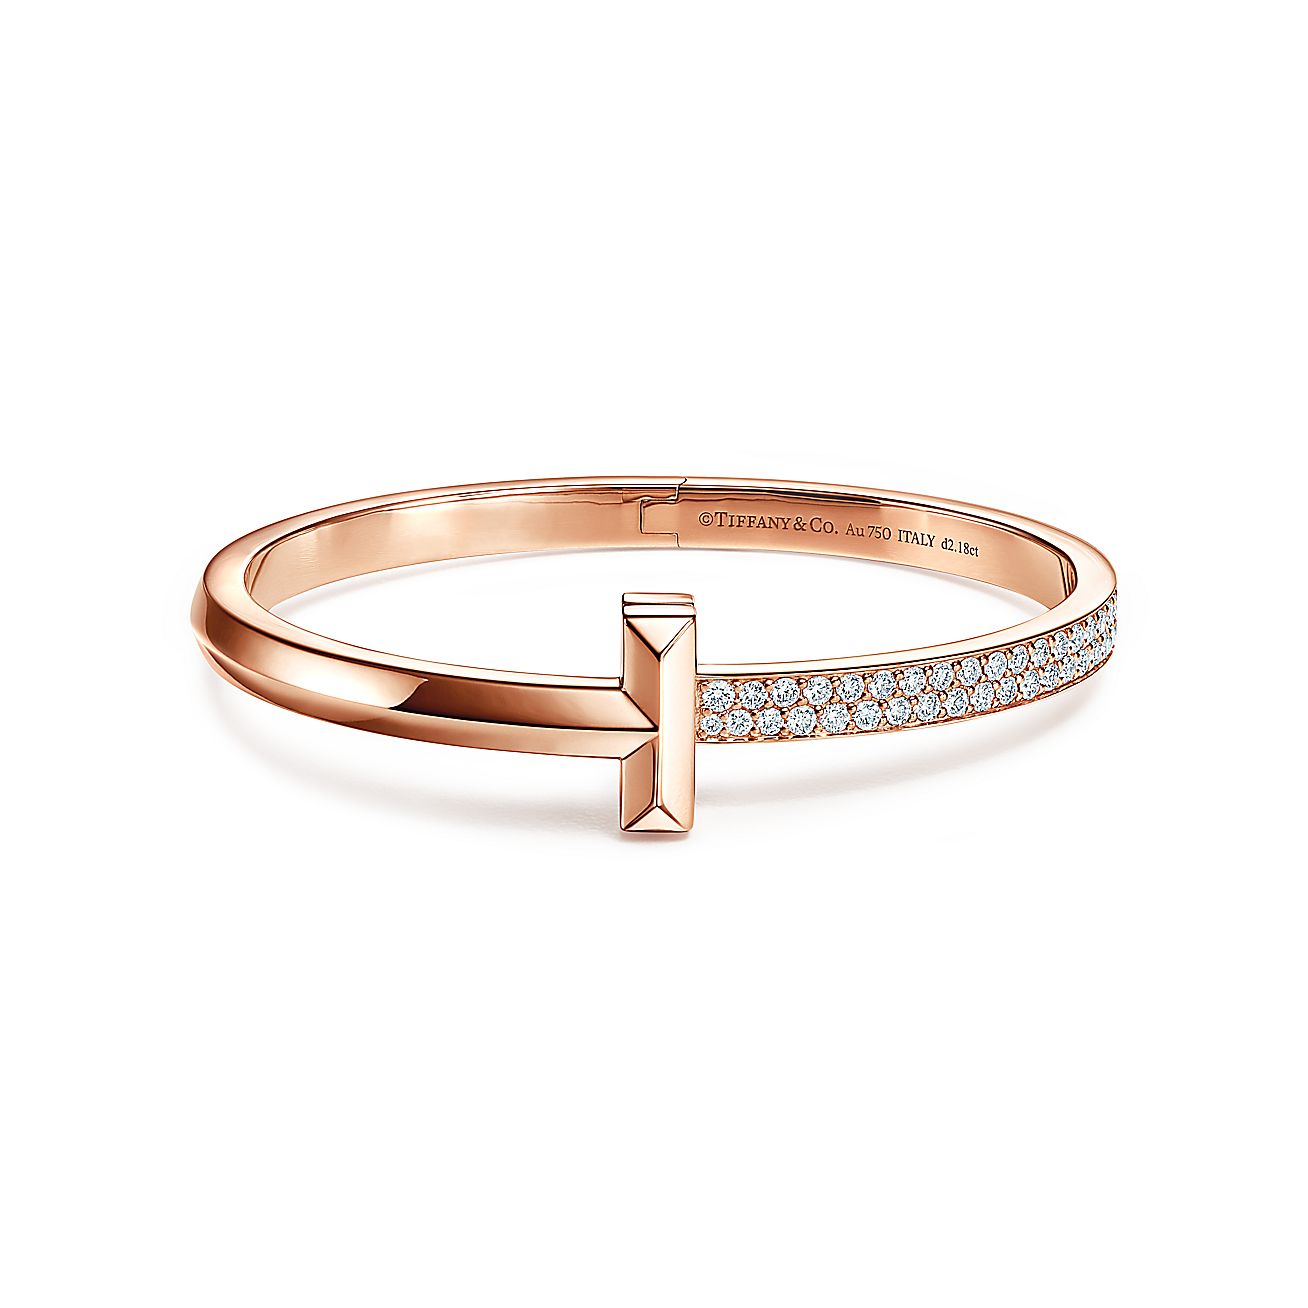 Tiffany T T1 Wide Diamond Hinged Bangle in 18k Gold